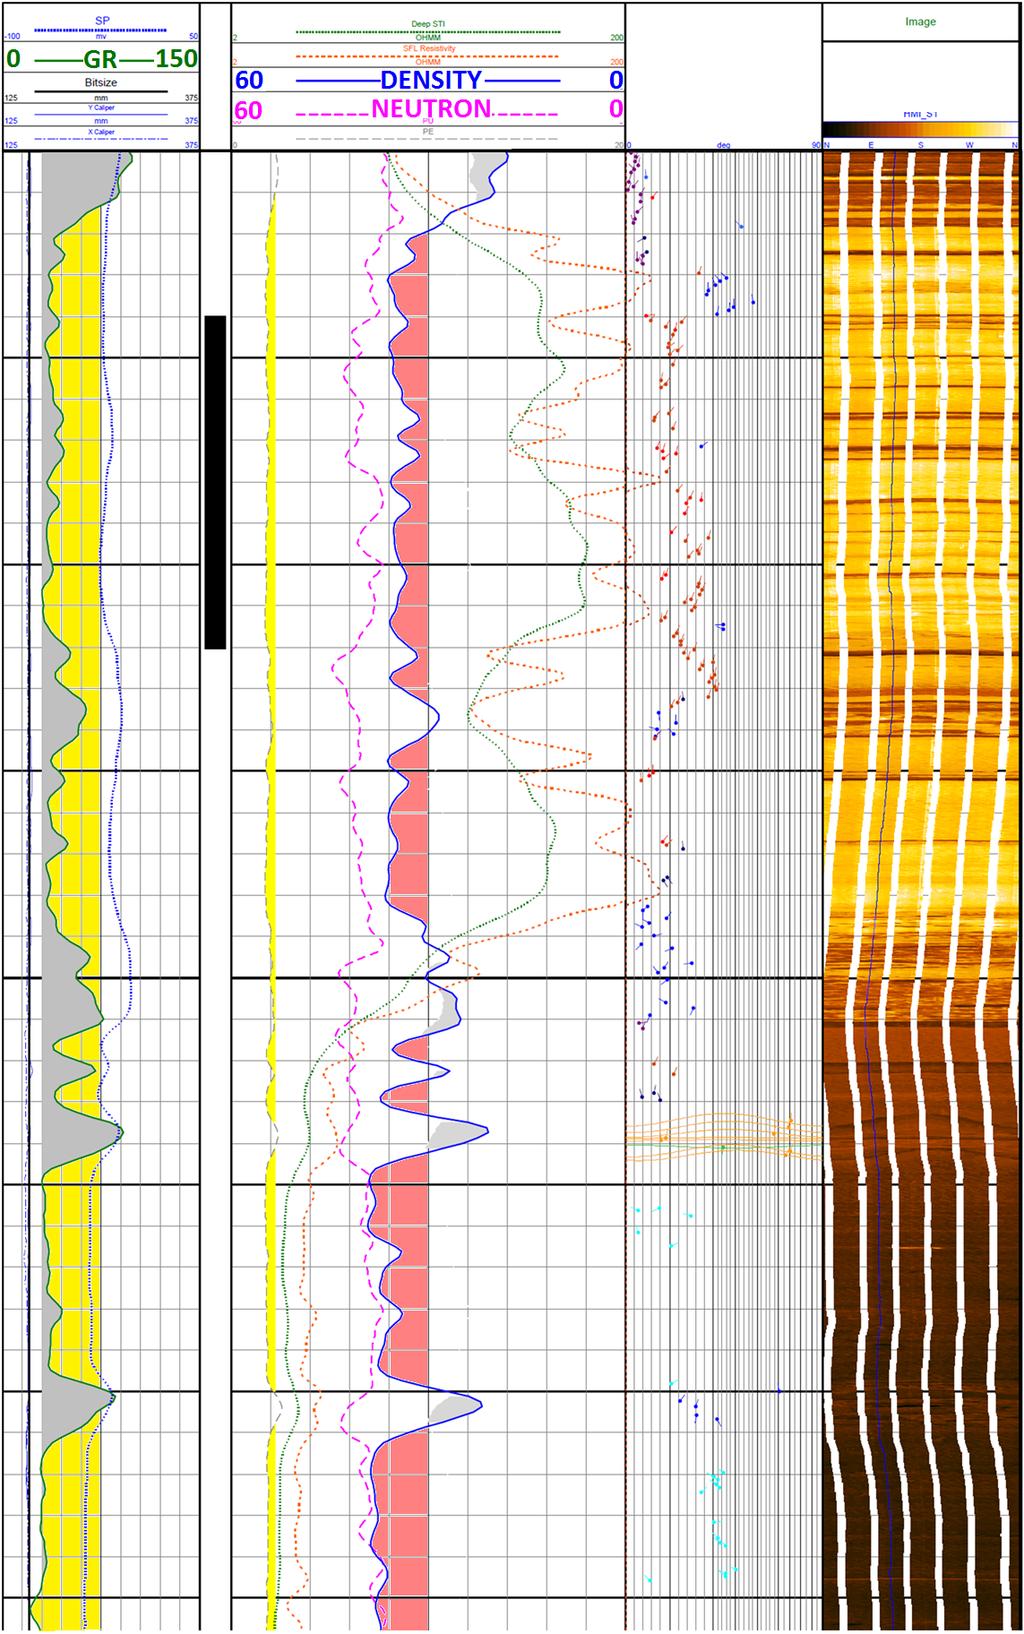 AAPG Search and Discovery Article #90173 CSPG/CSEG/CWLS GeoConvention 2011, Calgary, Alberta, Canada, May 9-11, 2011 Figure 4. Sand-dominated continuous IHS from lateral accretion beds of a point bar.